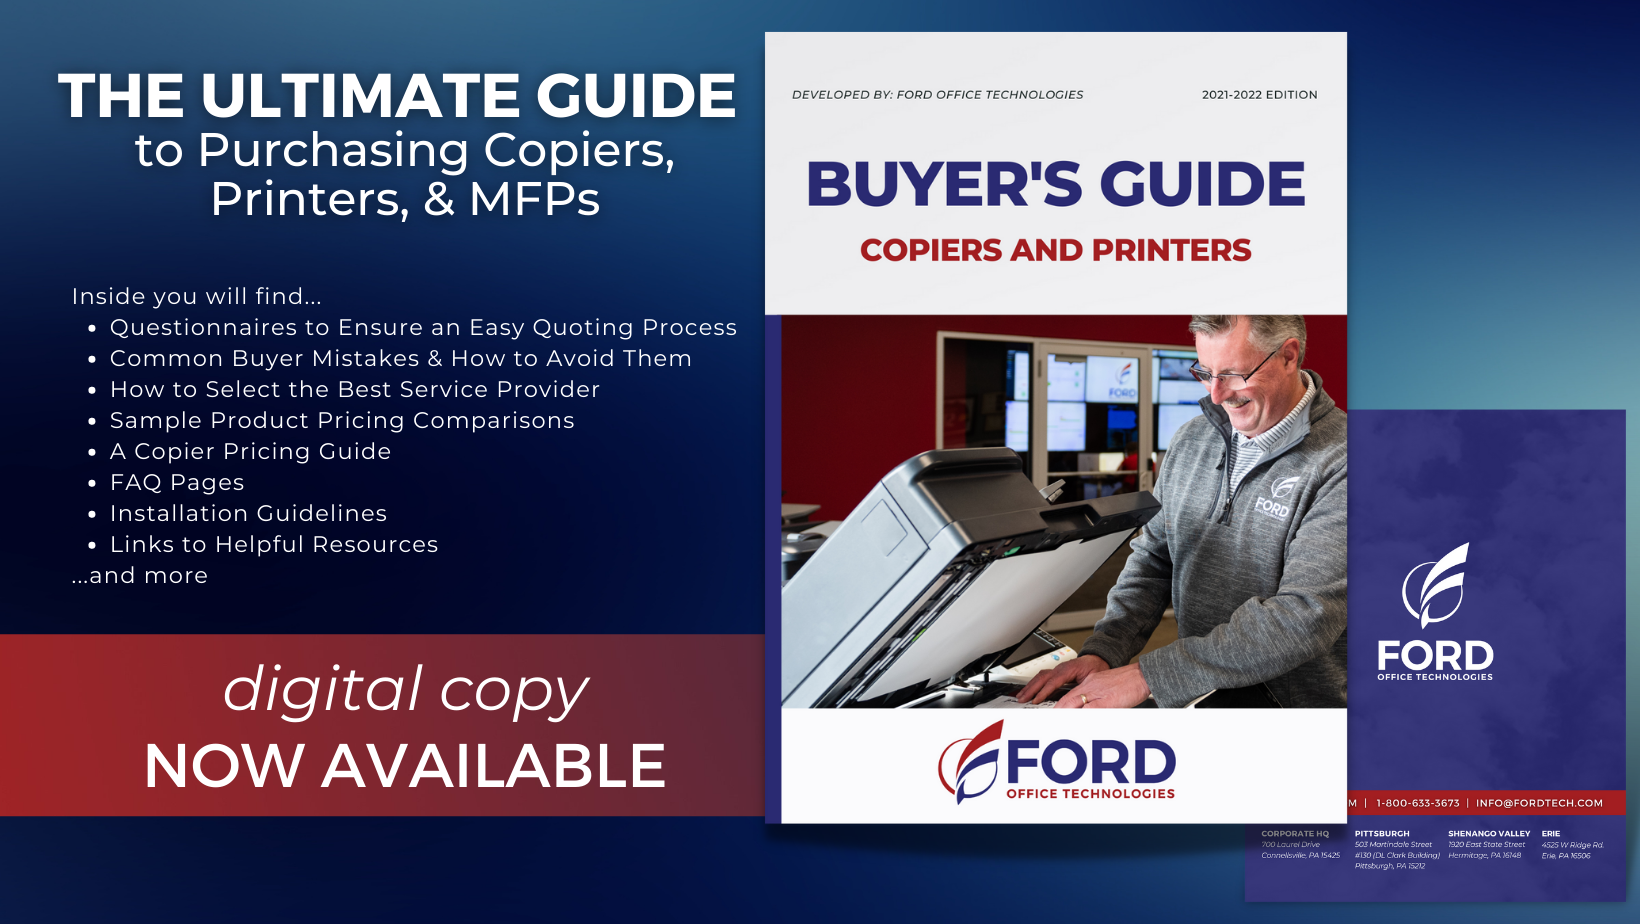 Buyer's guide to copiers, printers, and MFPs